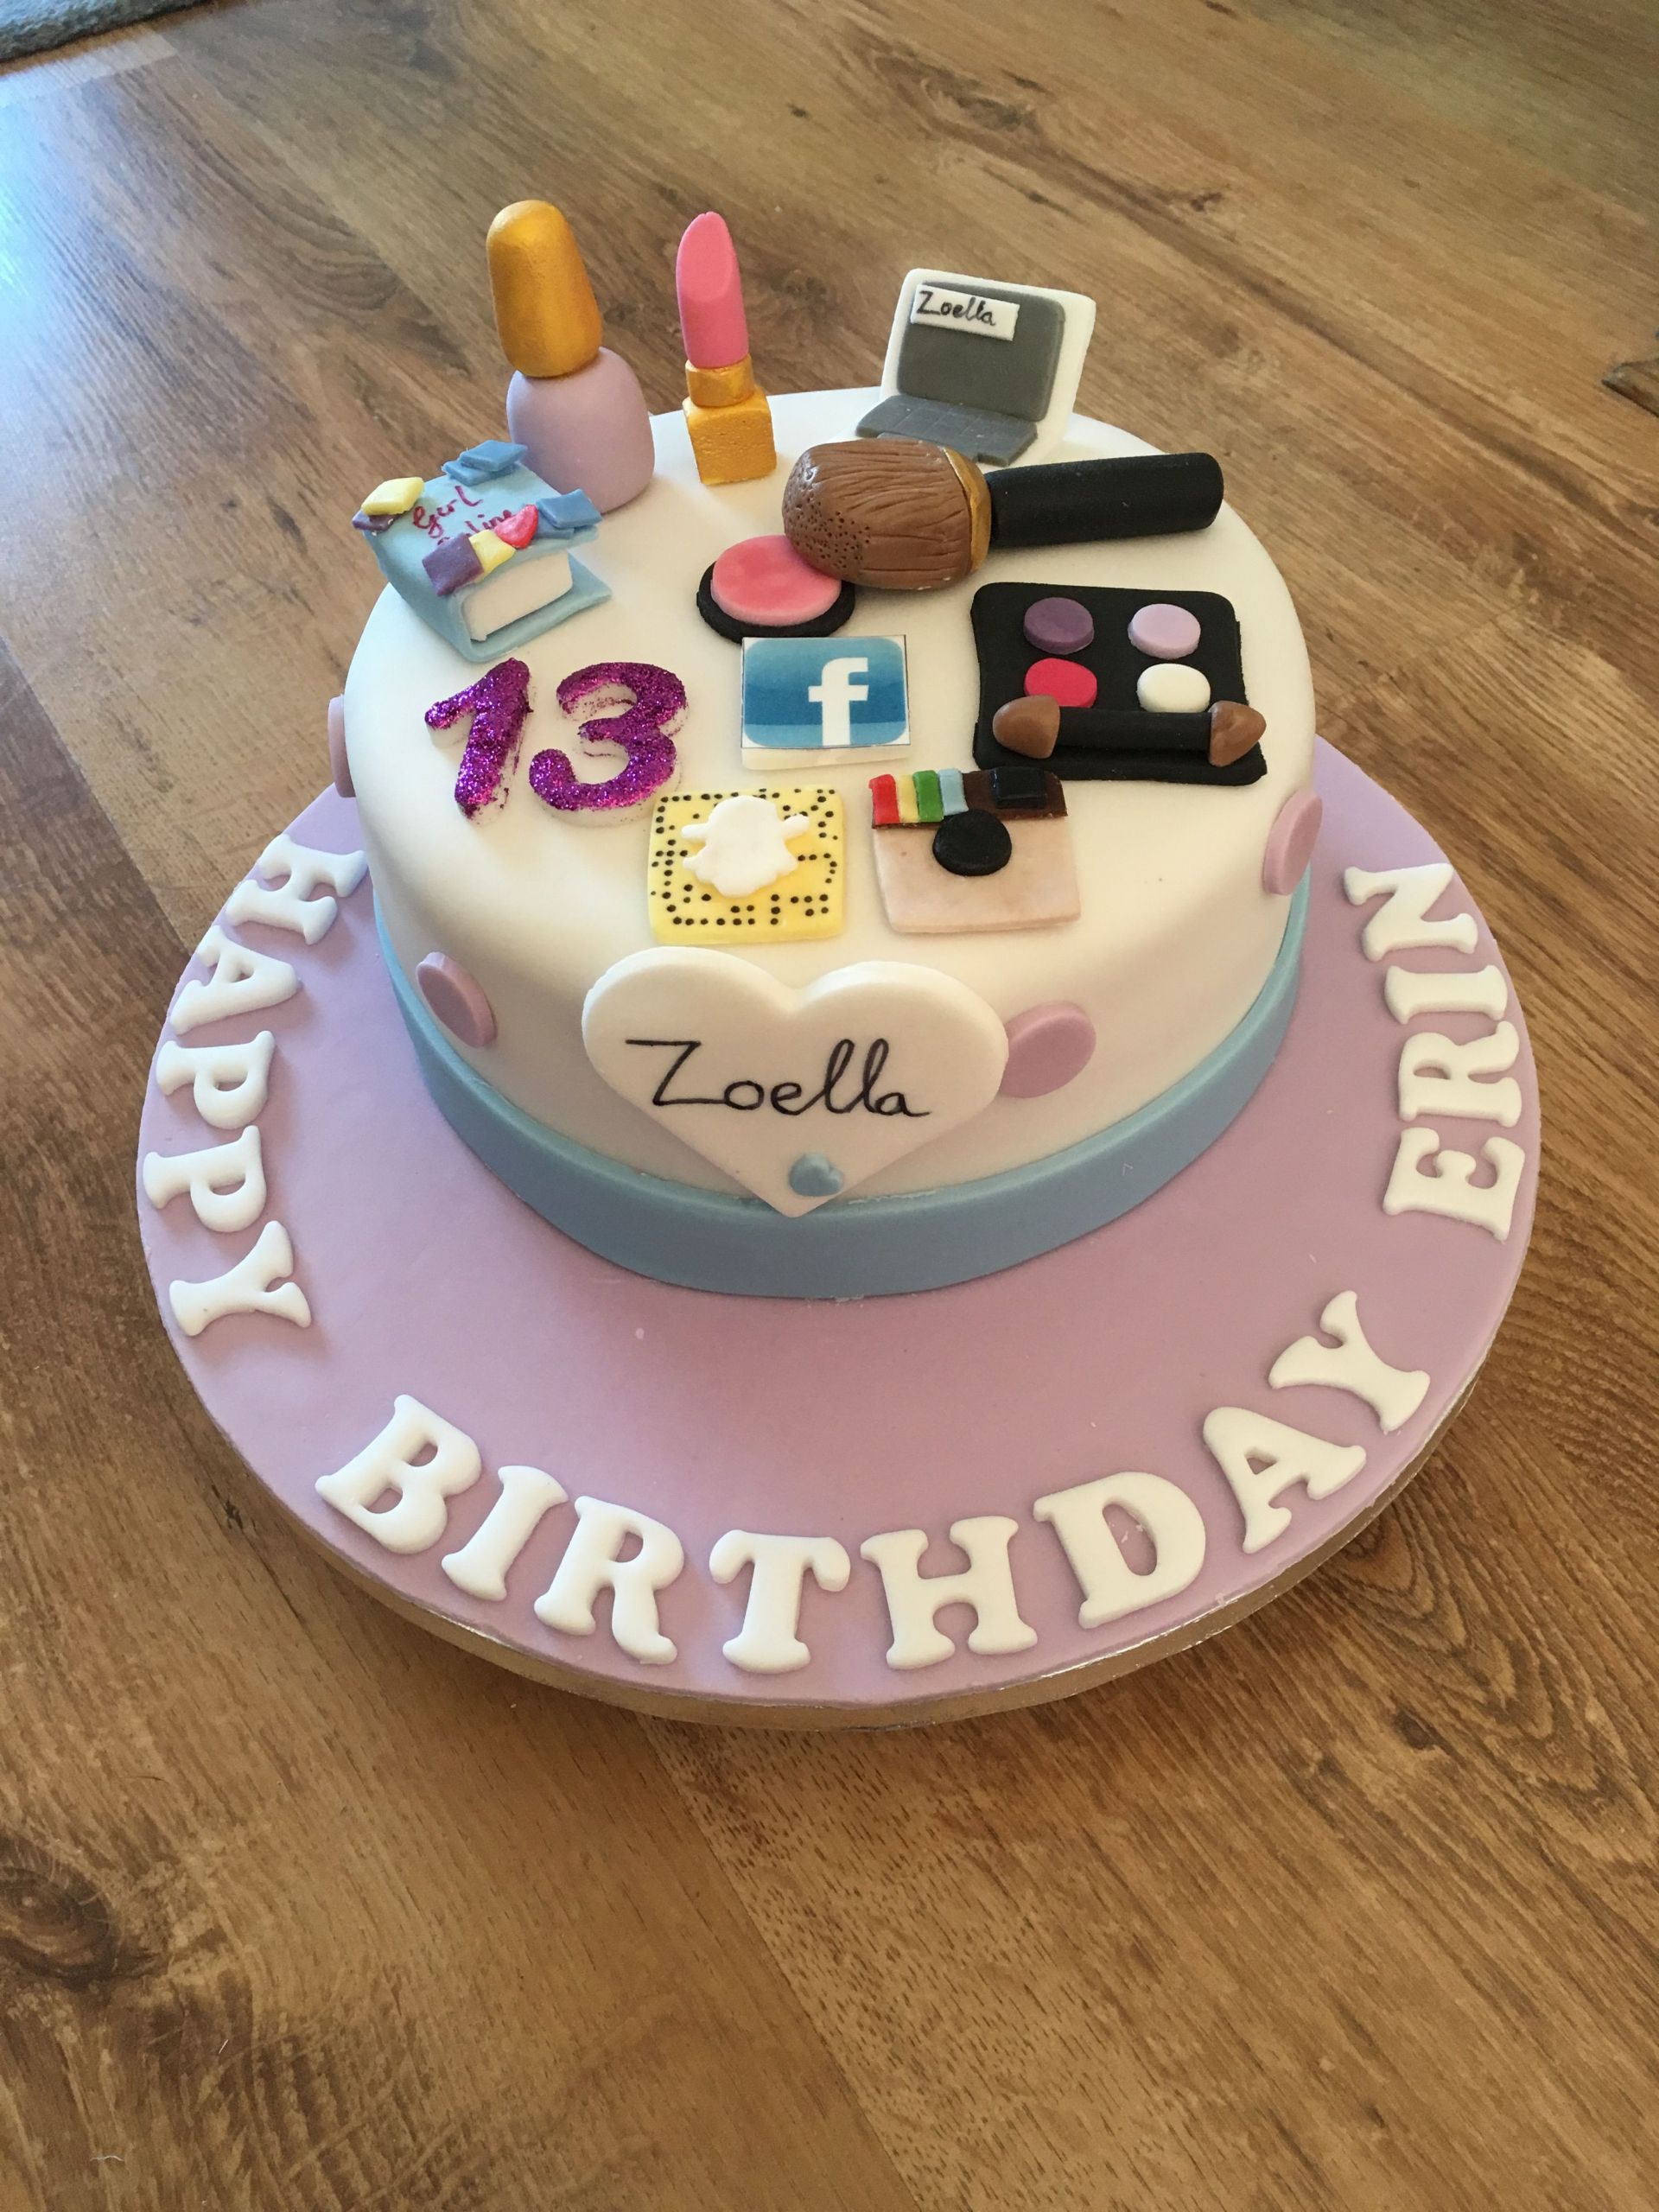 Birthday Party Ideas For A 13 Year Old Boy
 Zoella theme birthday cake for 13 year old